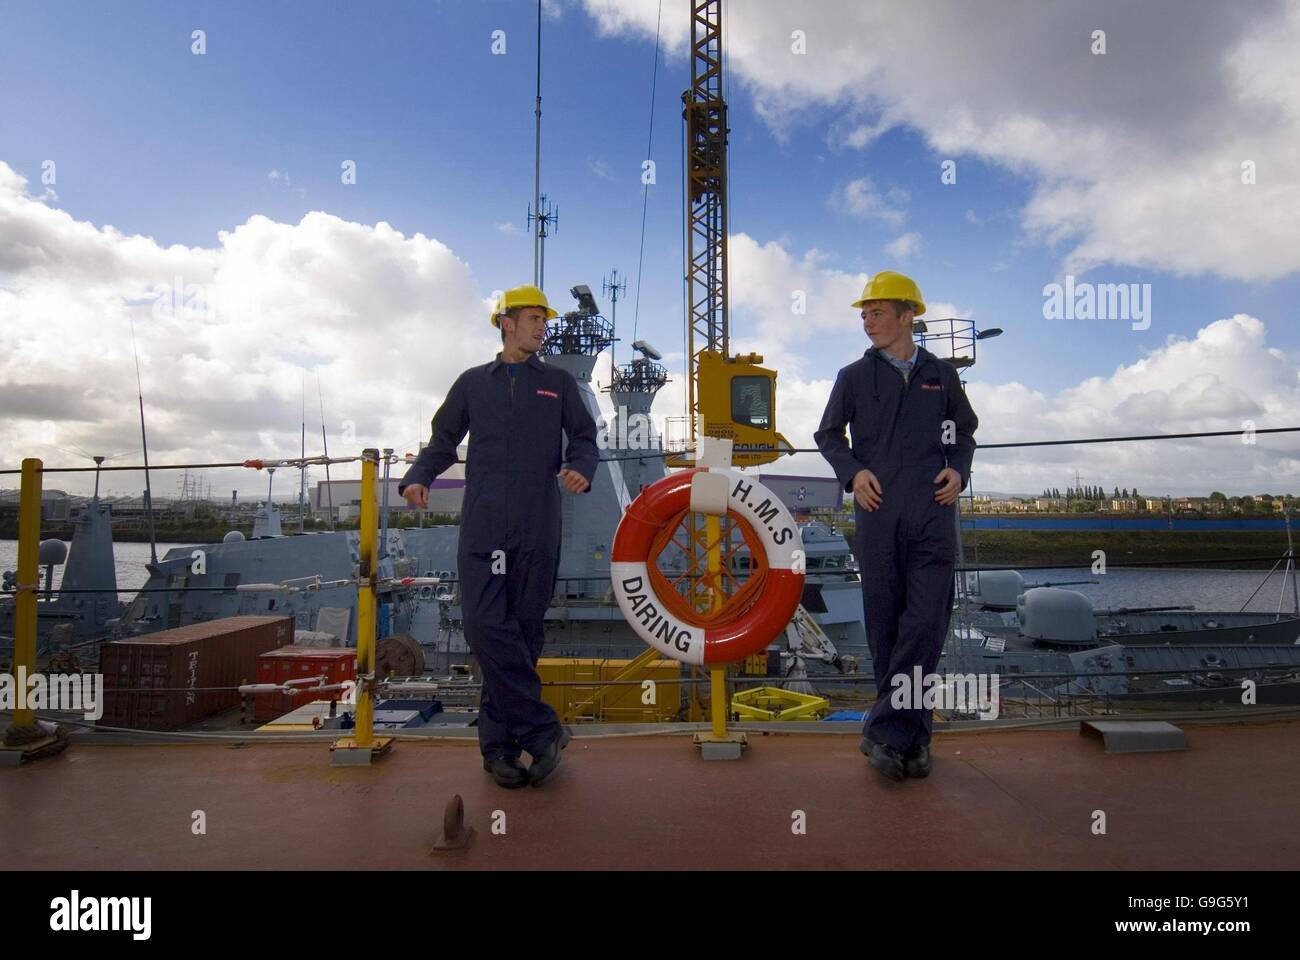 Gavin Law, 17 from Bishopbriggs (left) and Alan Wells, 17 from Renfrew on HMS. They are two of 70 new apprentices turning up for their first day of work on the BAE apprenticeship scheme at Clyde shipyard, Glasgow. Stock Photo